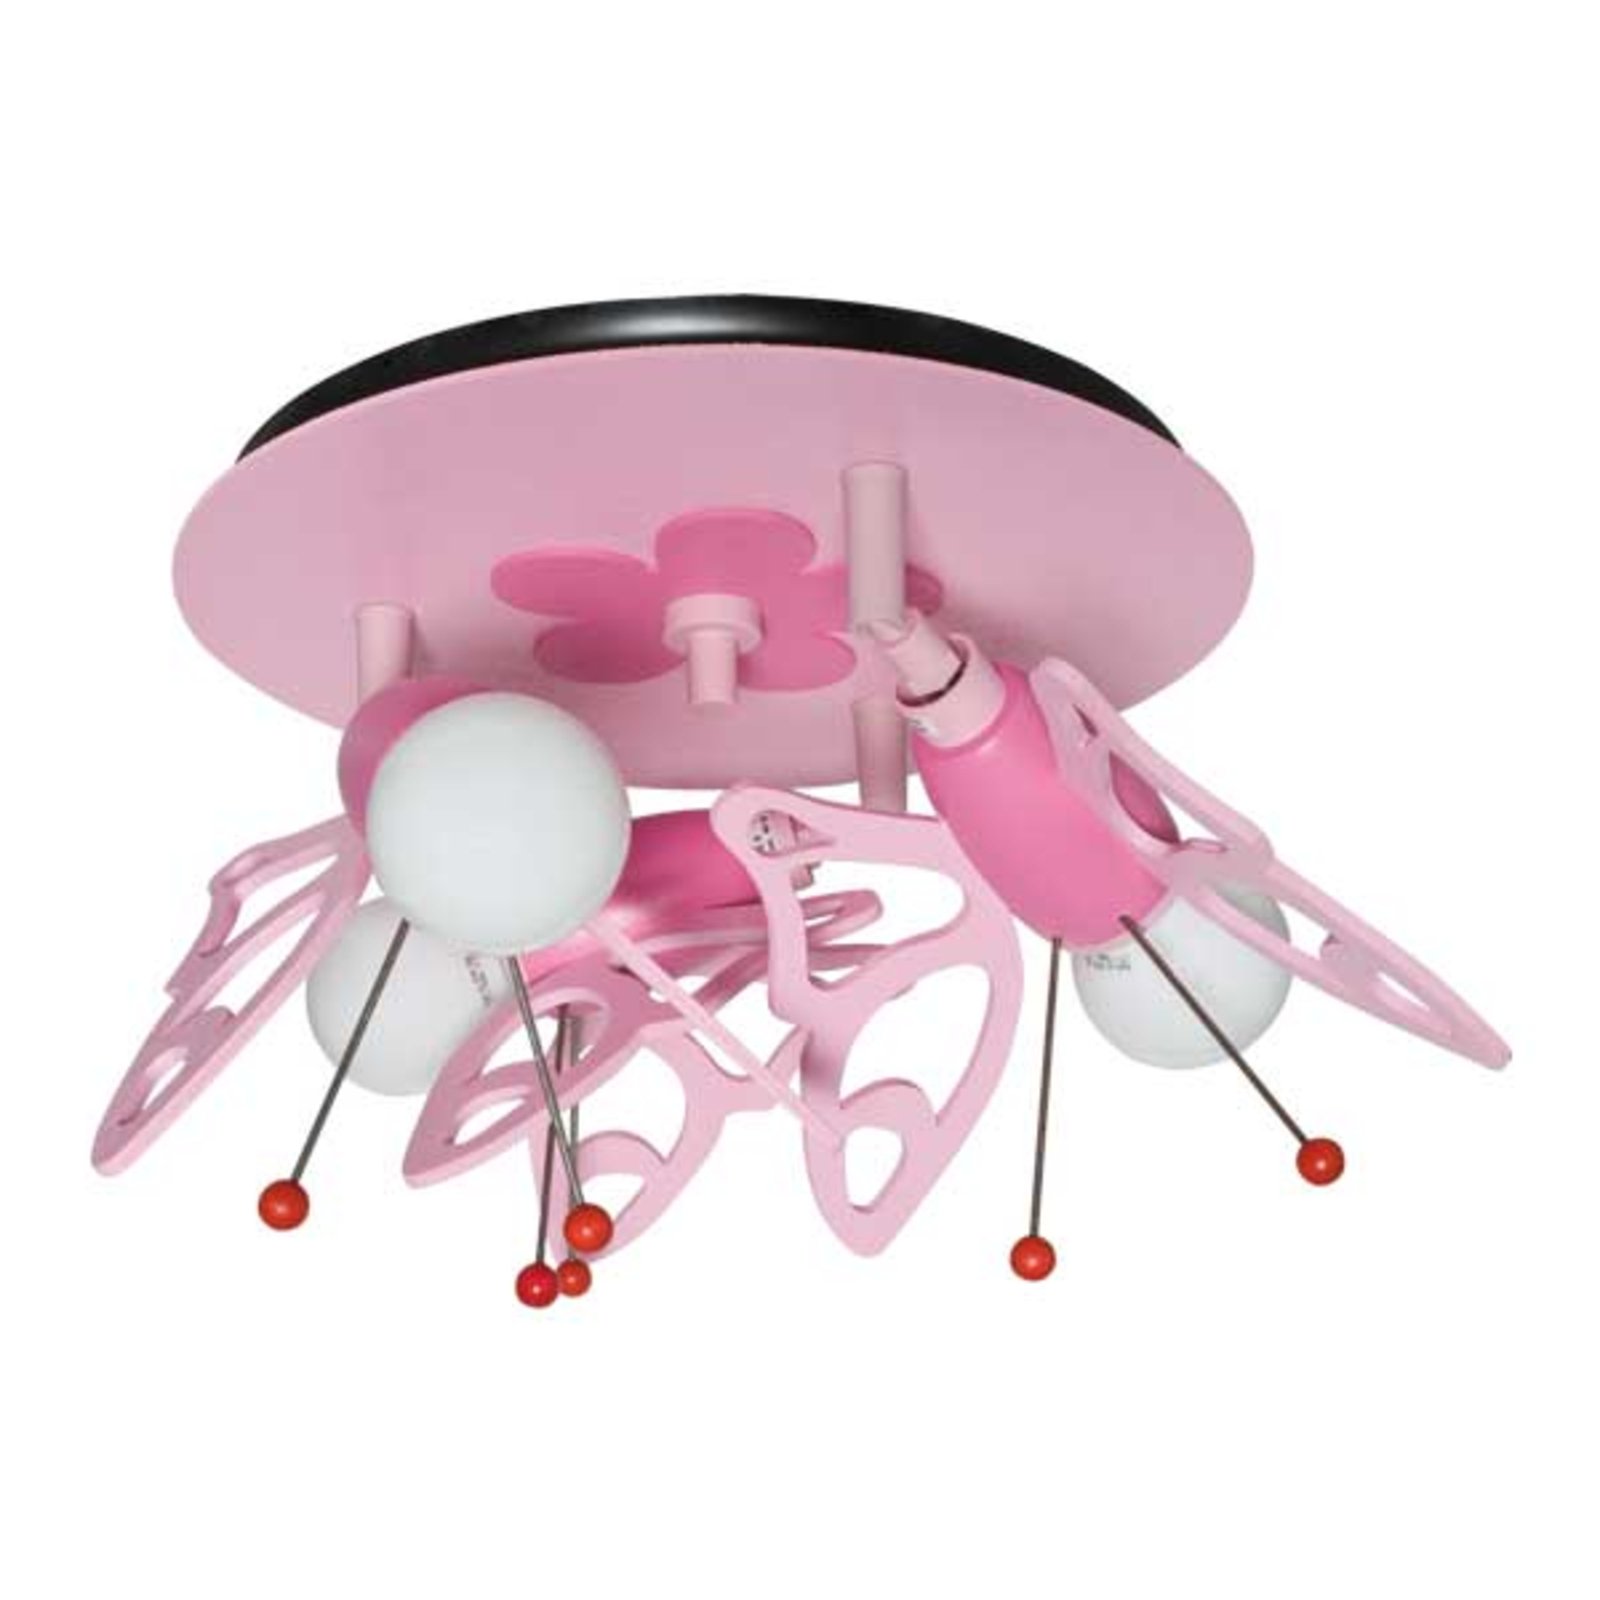 Butterfly ceiling light for a child’s room, 3-bulb